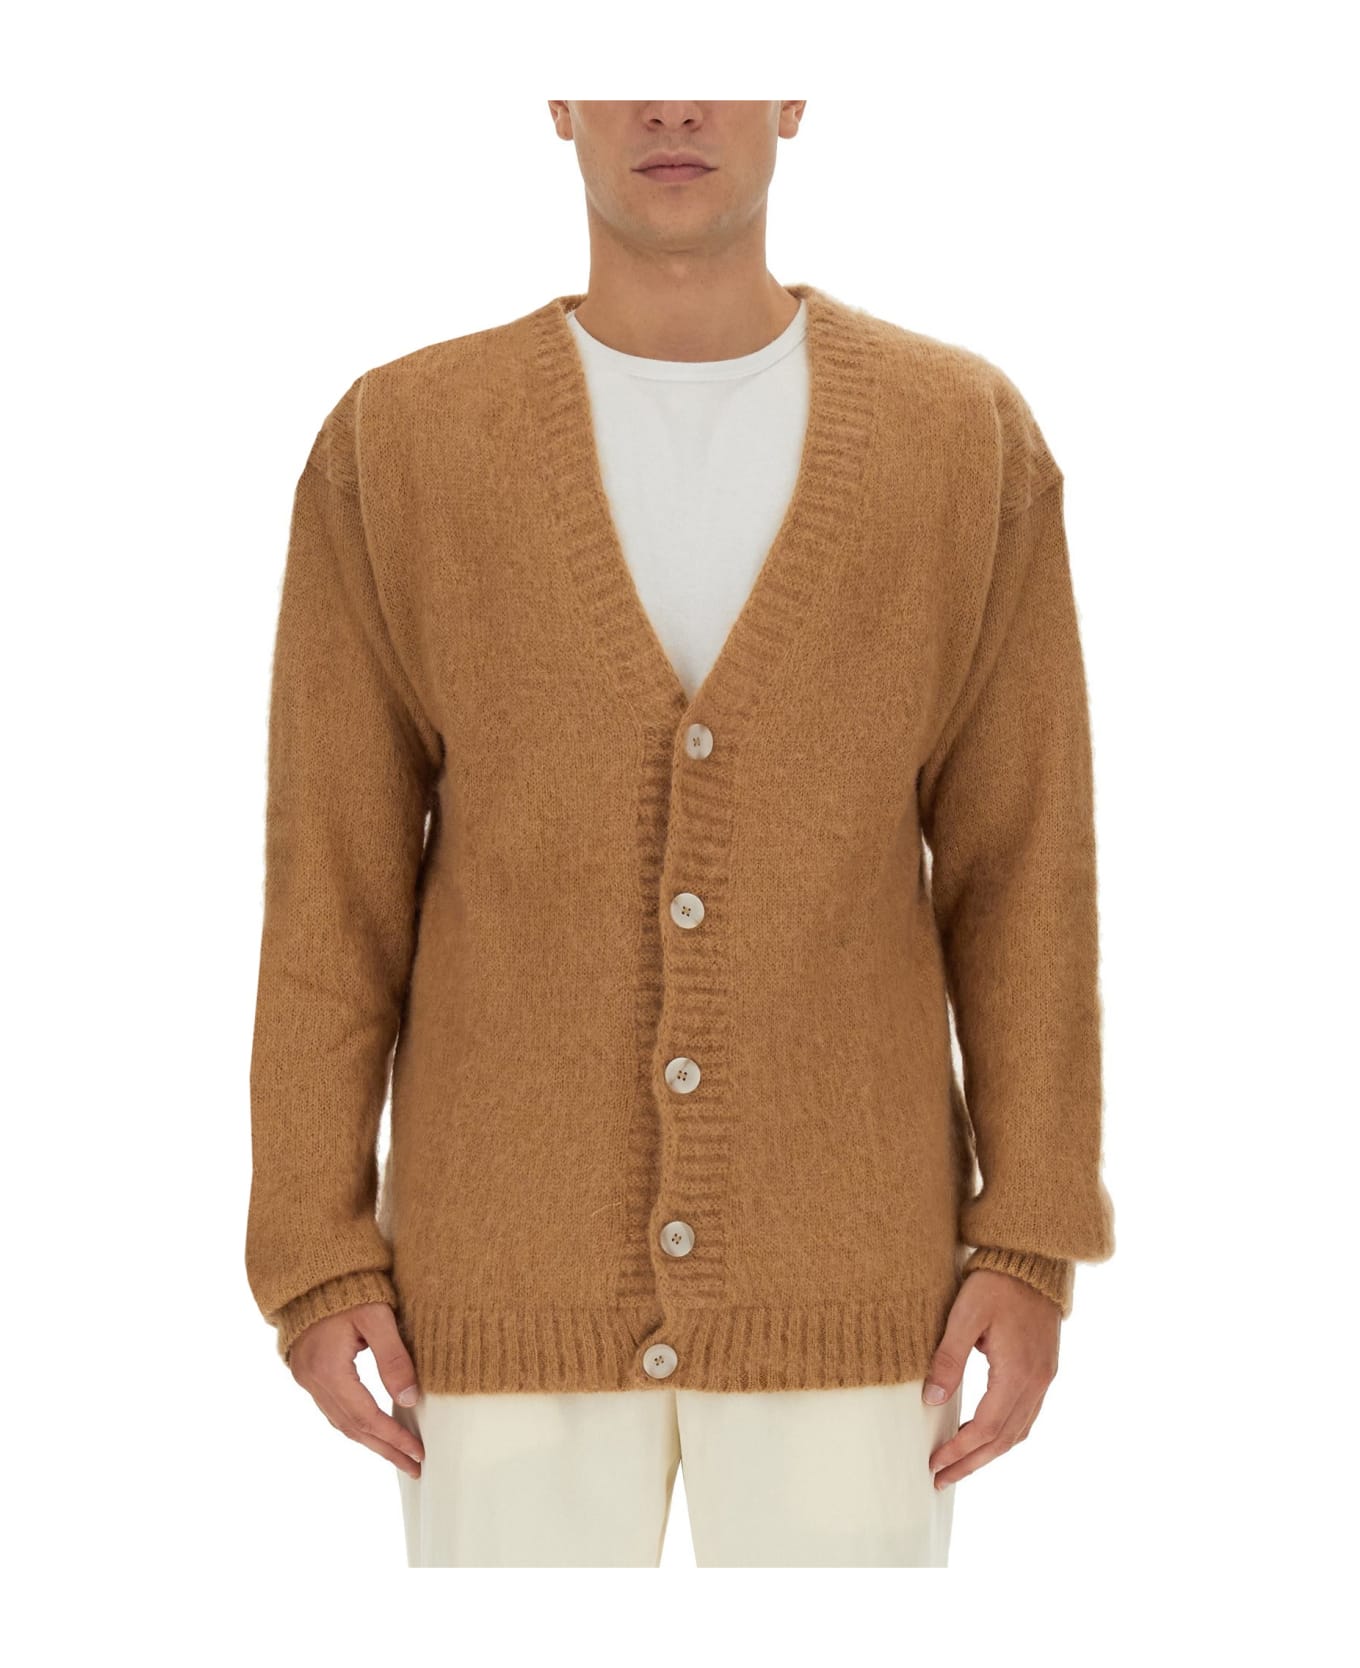 Family First Milano V-neck Cardigan - BEIGE